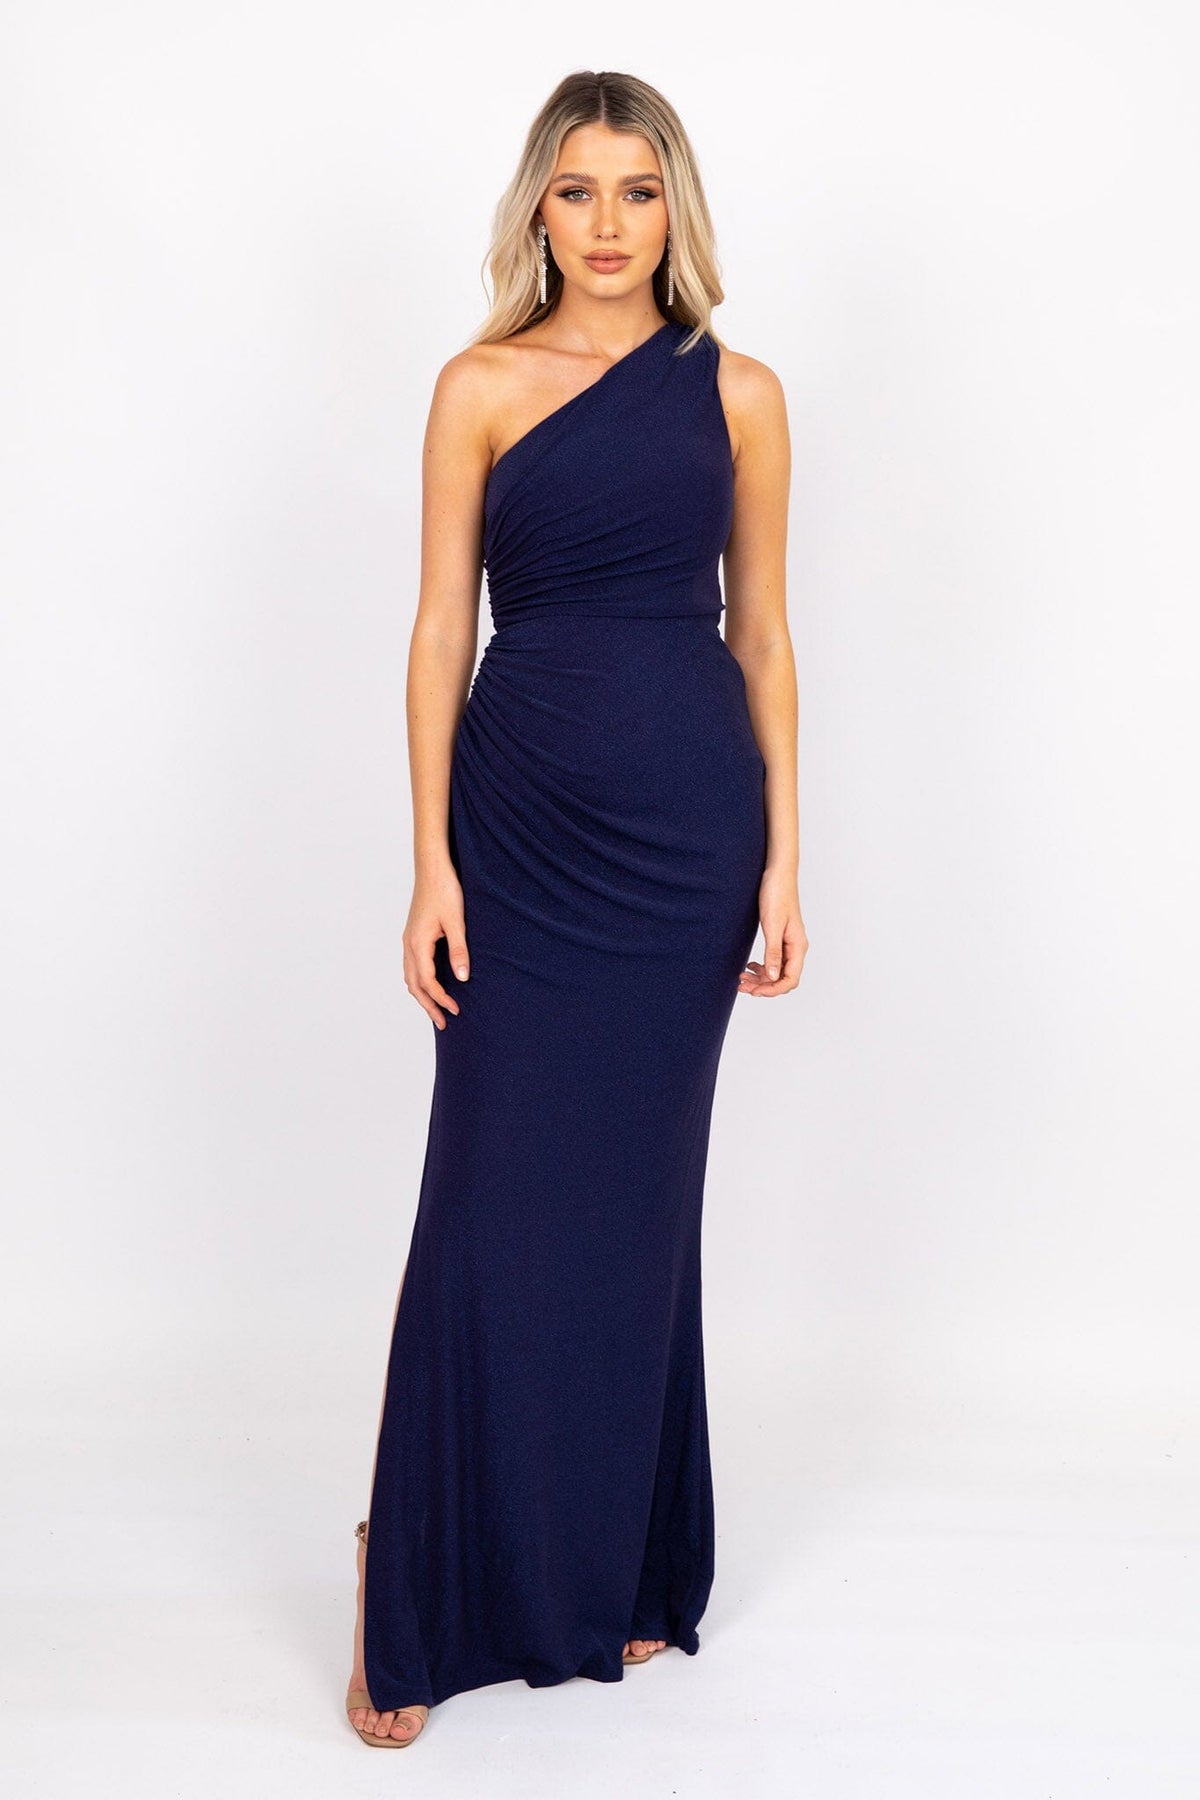 Navy Floor Length Fitted Evening Dress with One Shoulder Bodice, Draping Detail and Side Leg Slit